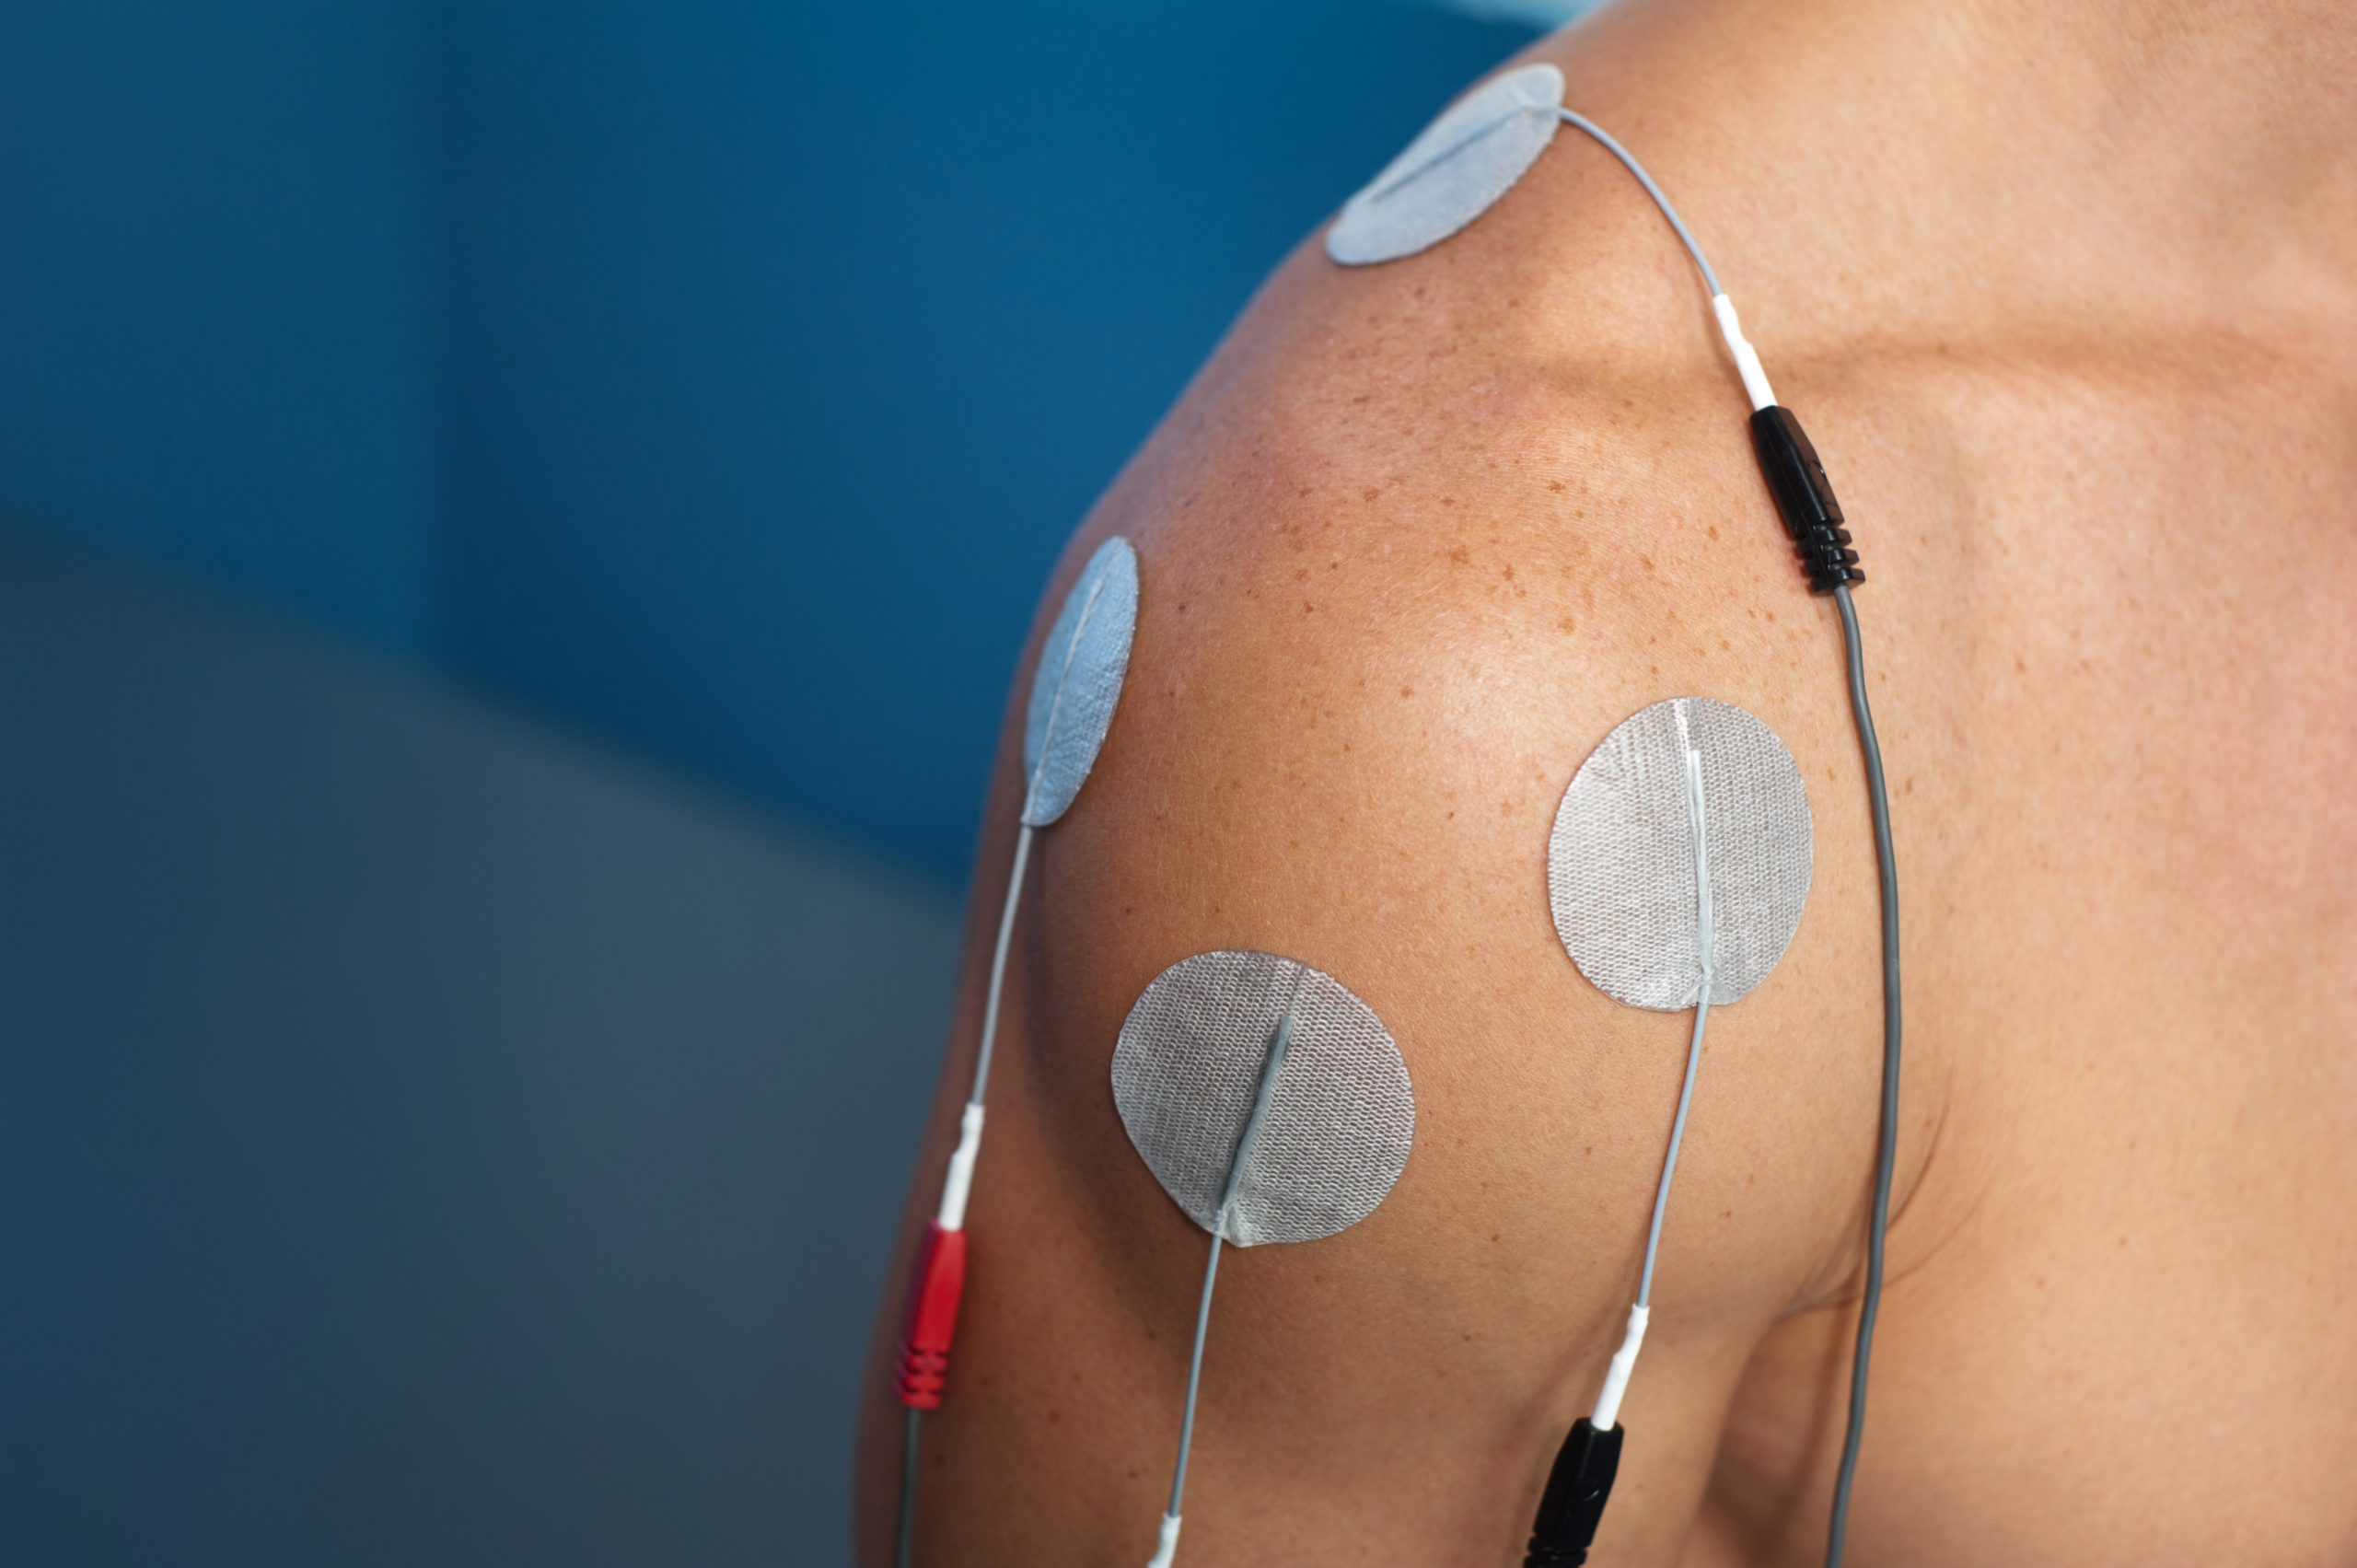 What Can Electric Stimulation Therapy Do For Your Pain?